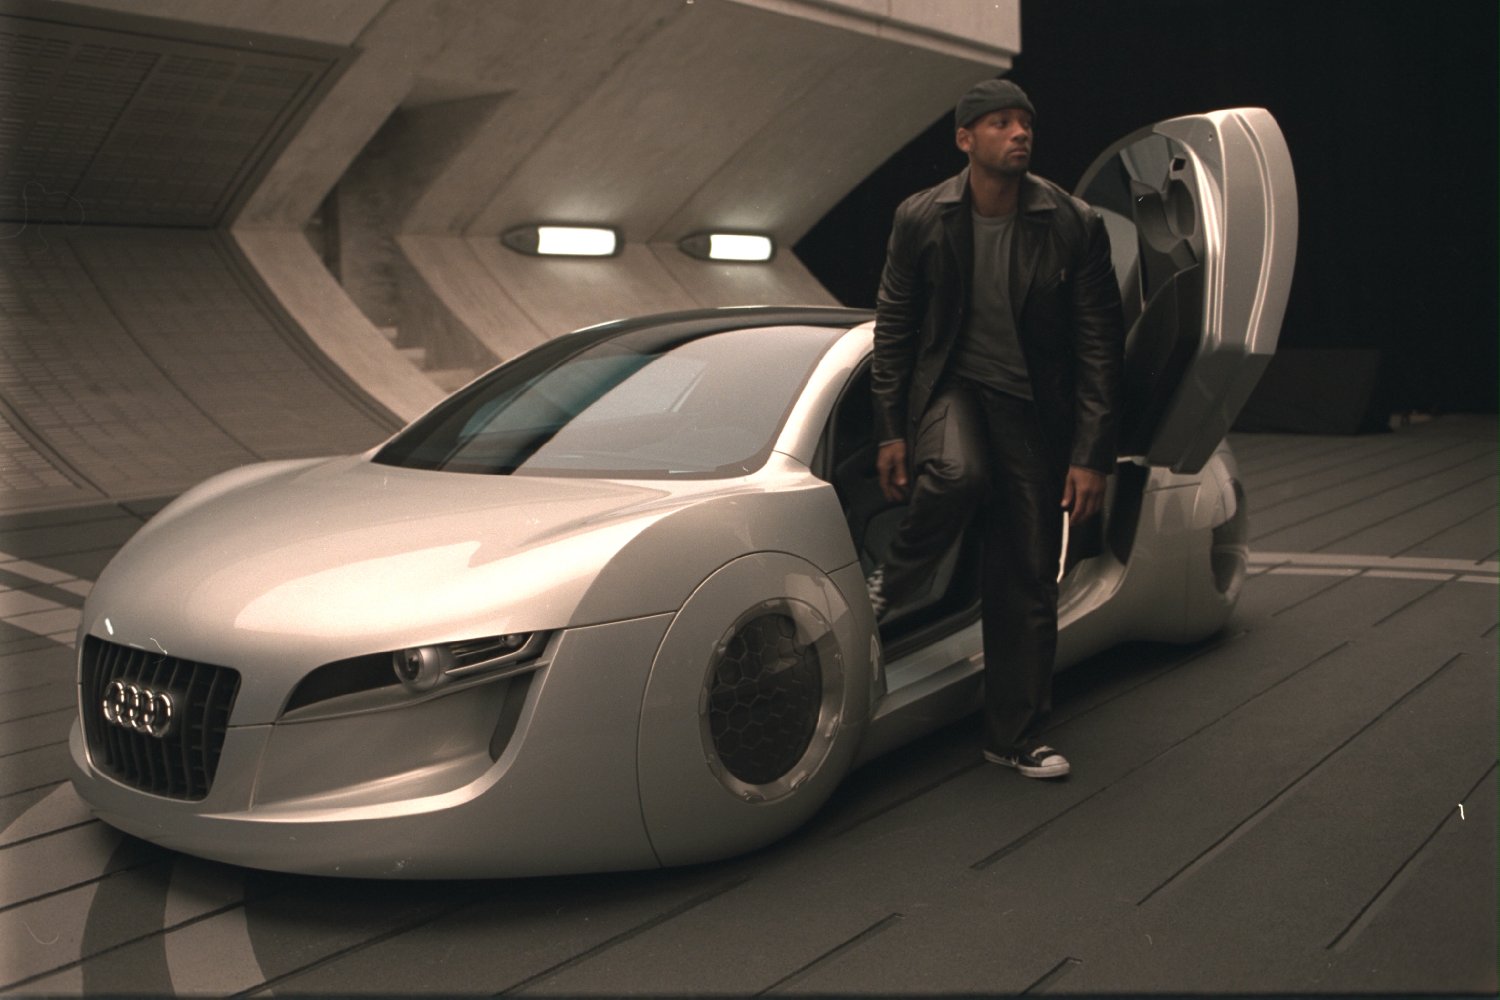 PHOTO: Will Smith is seen in this movie still from "I, Robot."